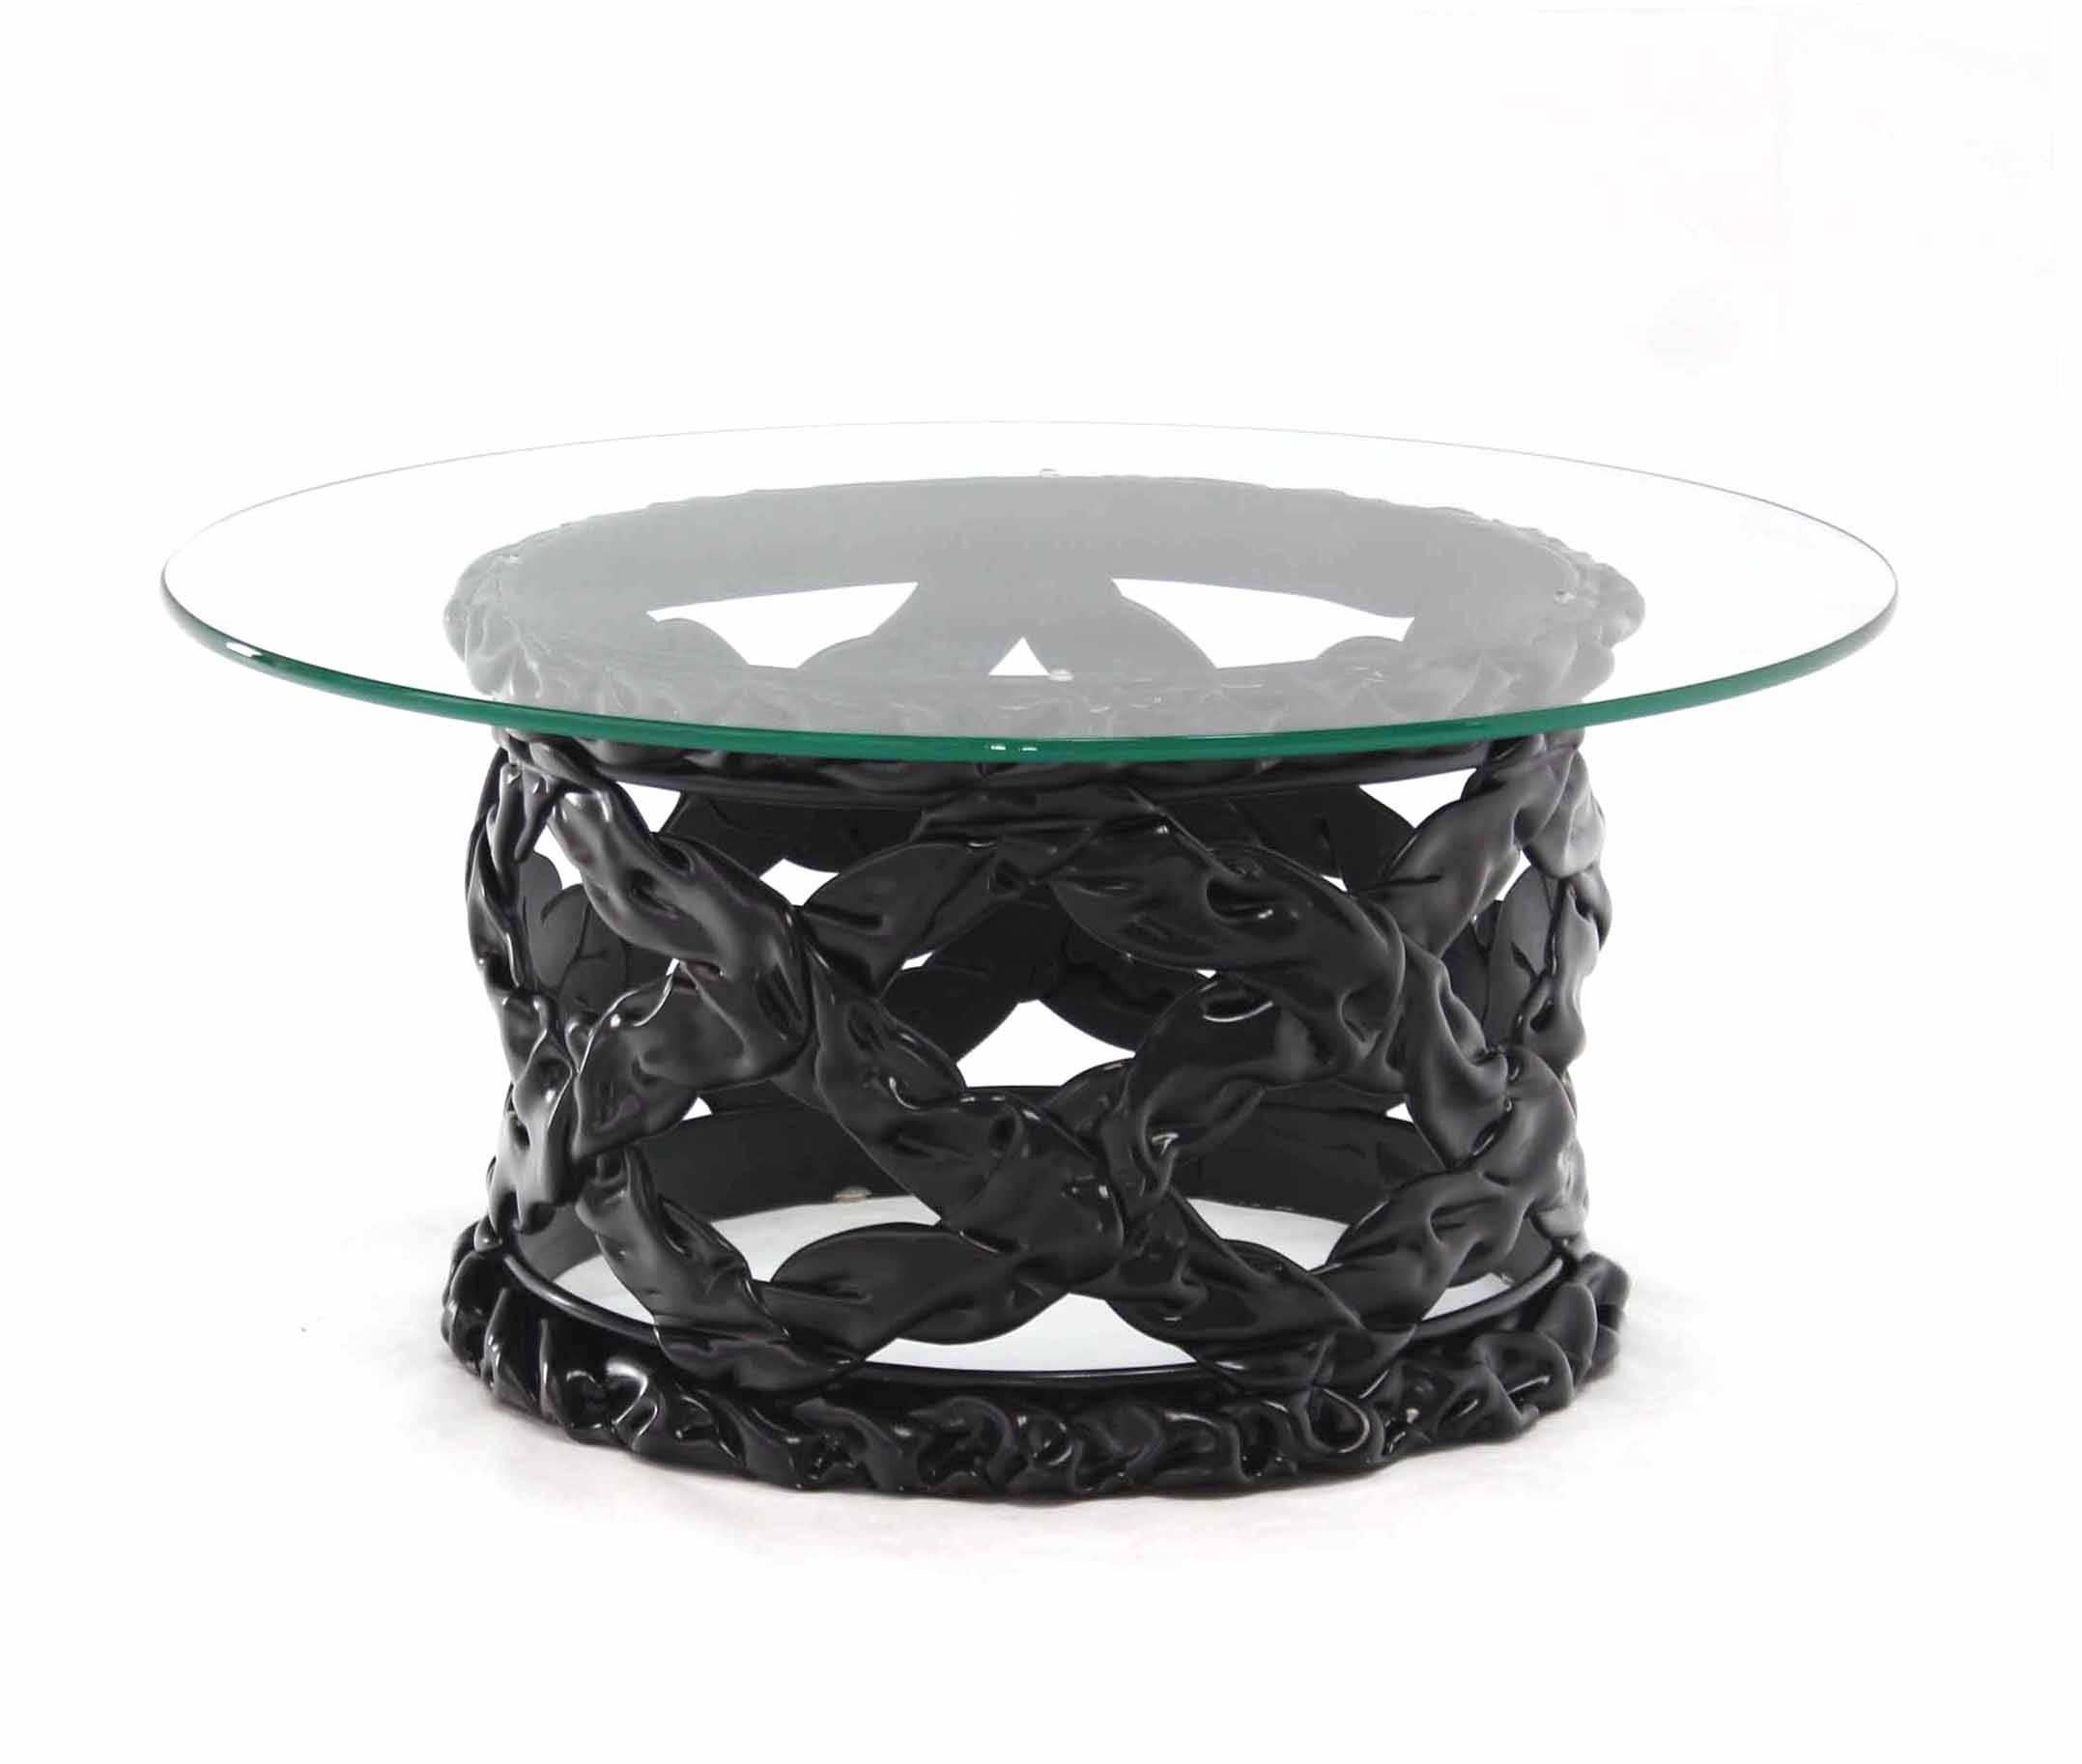 Black Lacquer Spaghetti Style Mid-Century Modern Round Glass Top Coffee Table For Sale 2